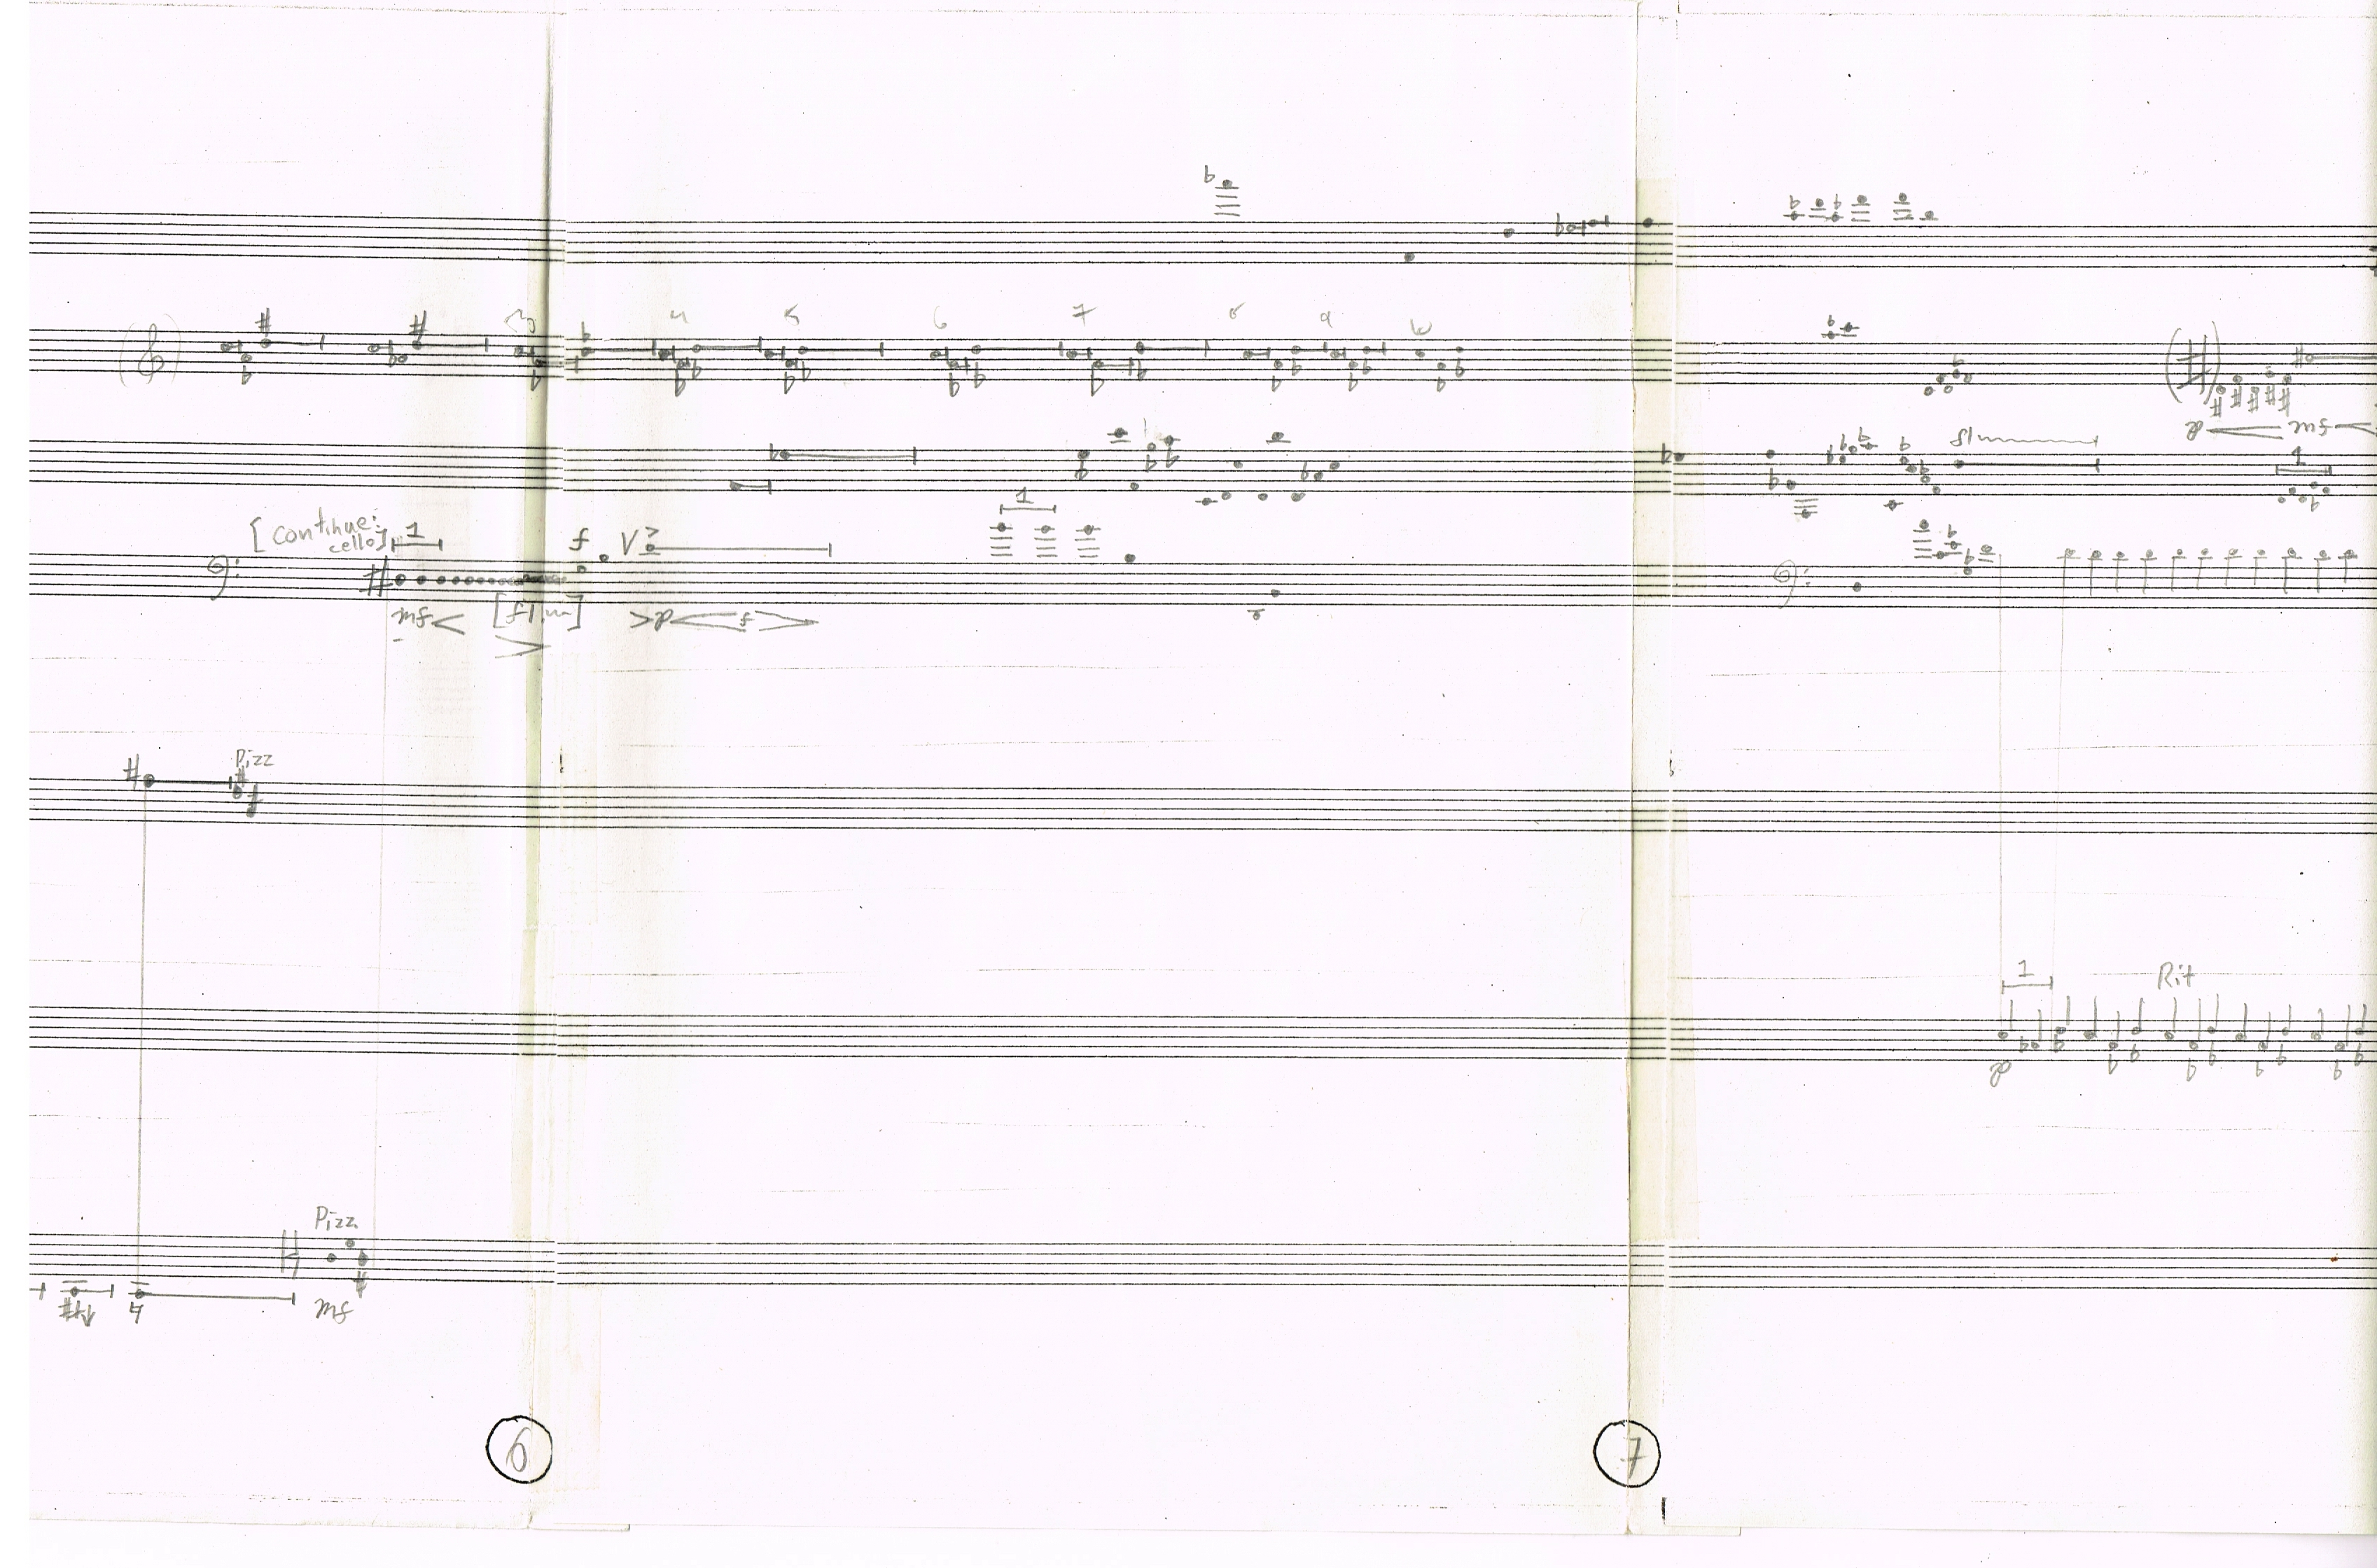 Richard Burdick's composition "mind without Matter" from 1979 page 1